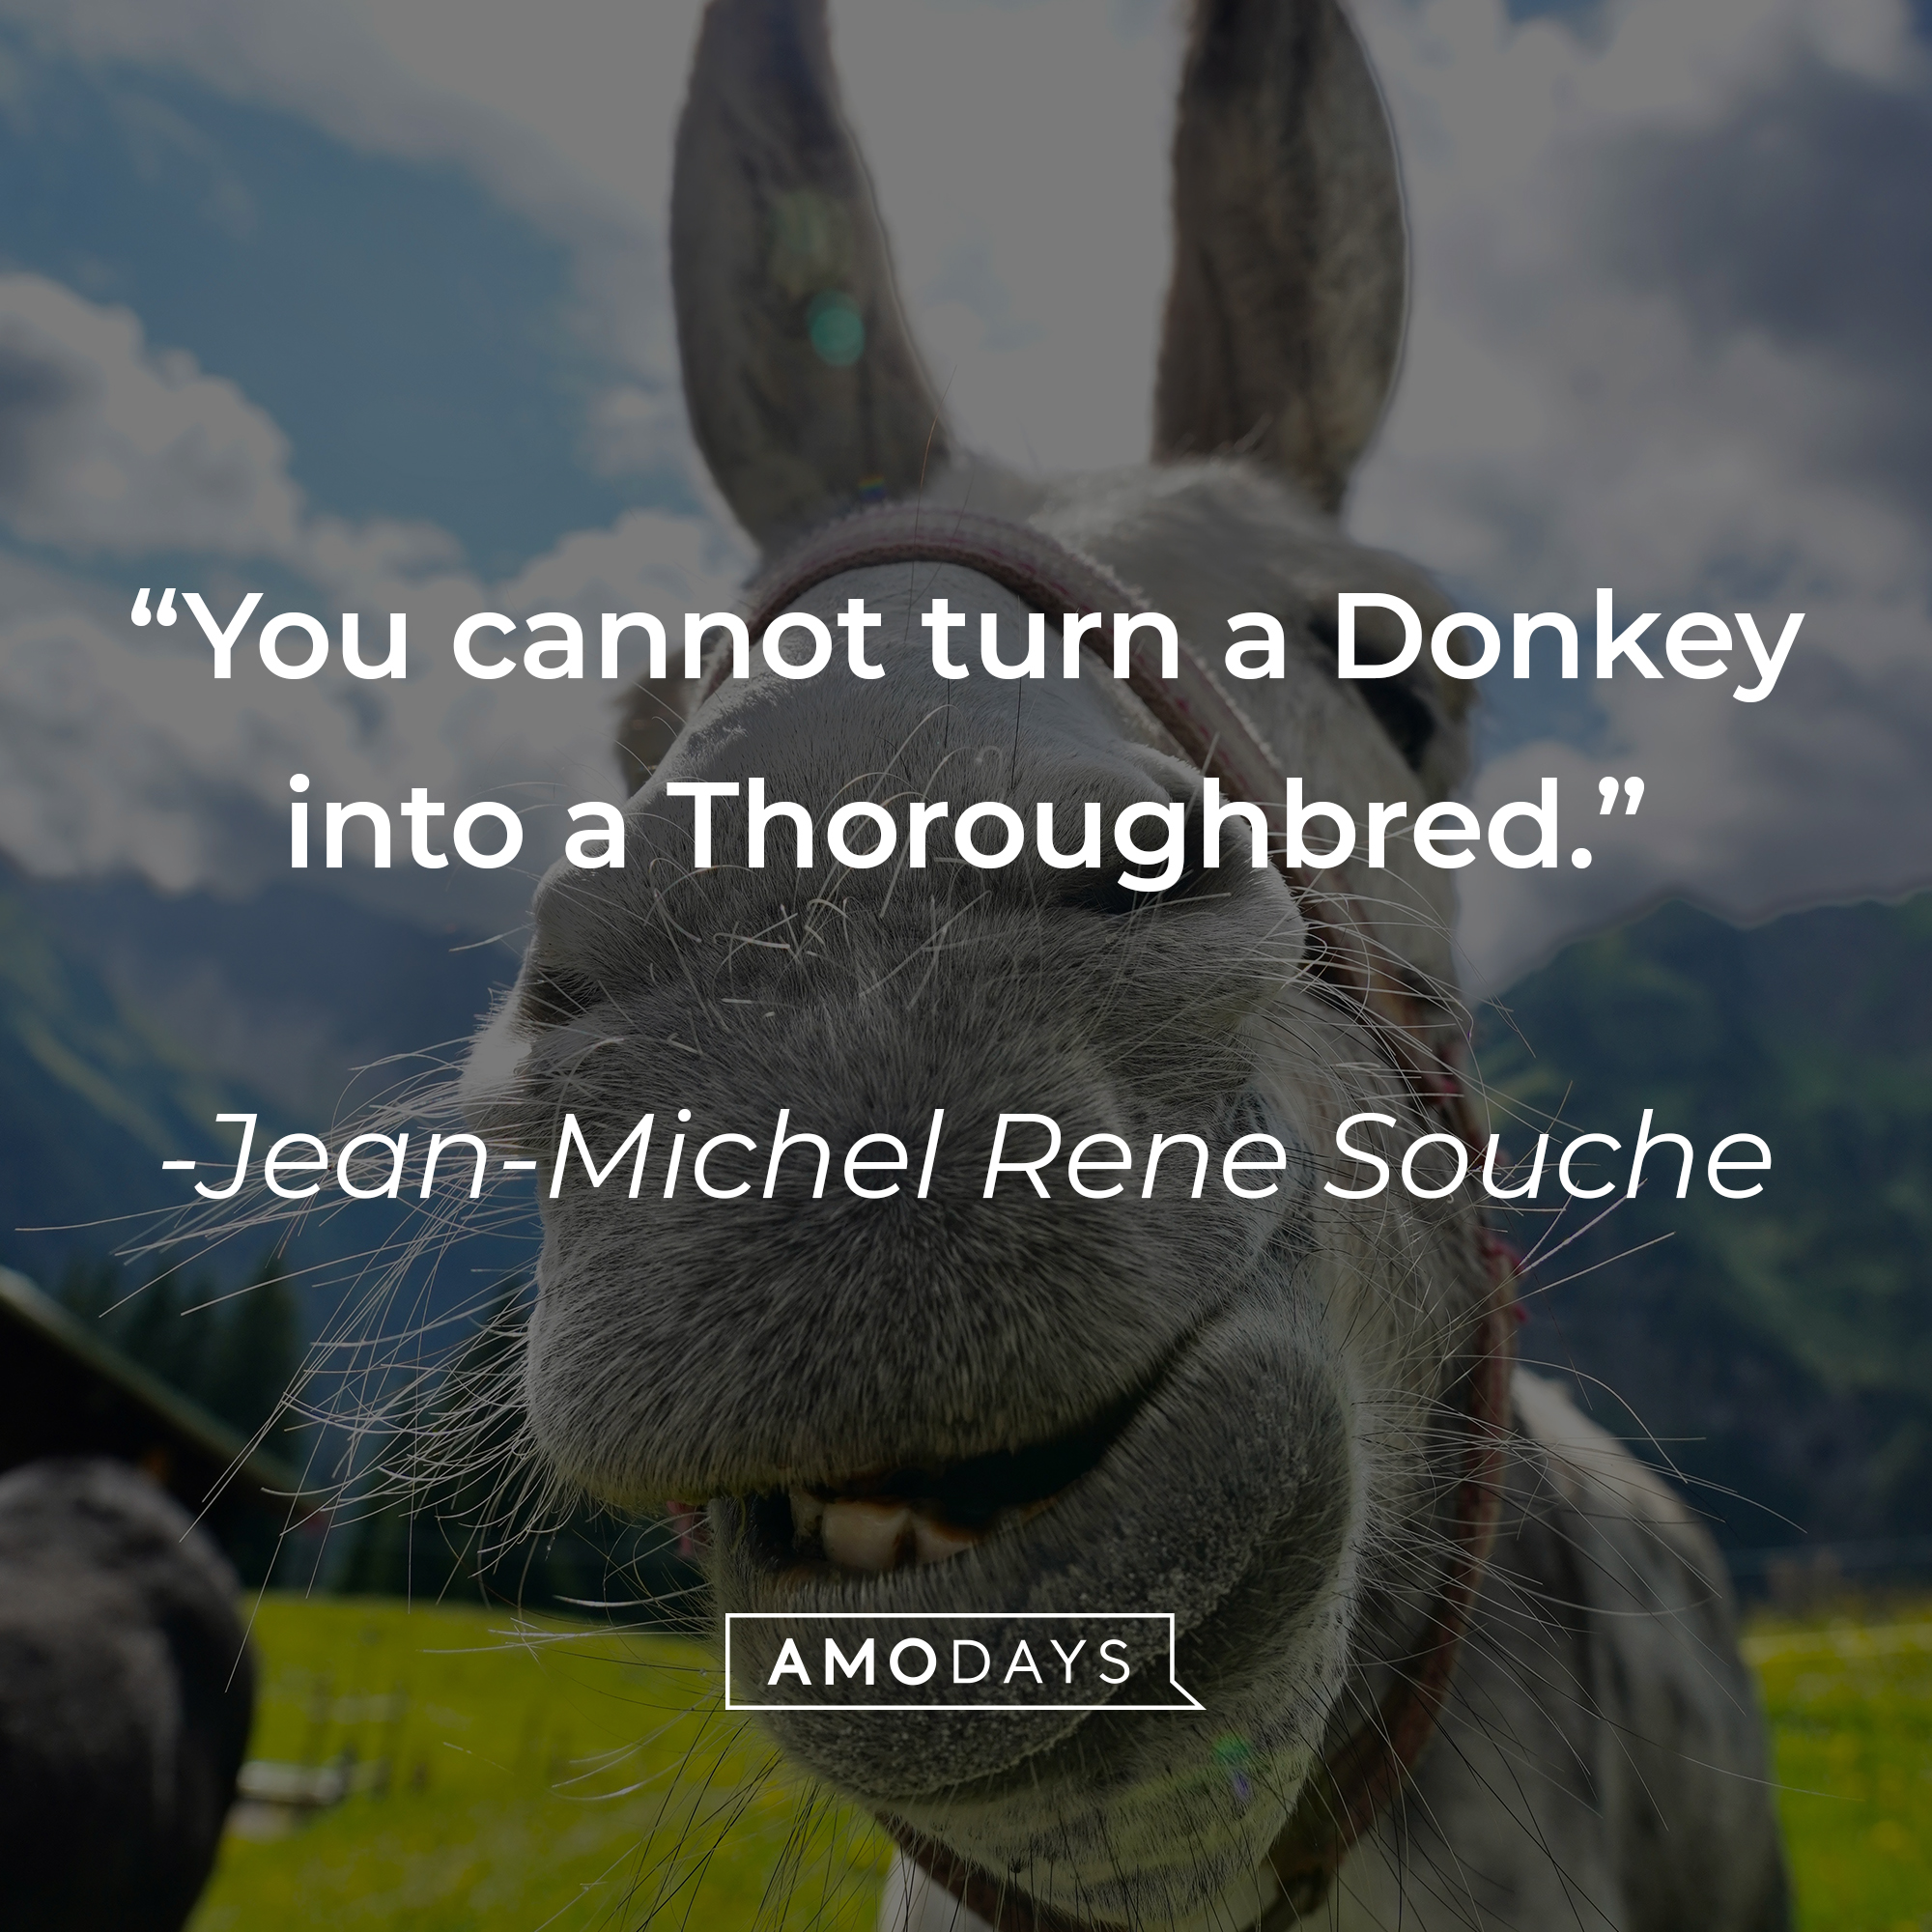 Jean-Michel Rene Souche's quote: "You cannot turn a Donkey into a Thoroughbred." | Source: Unsplash